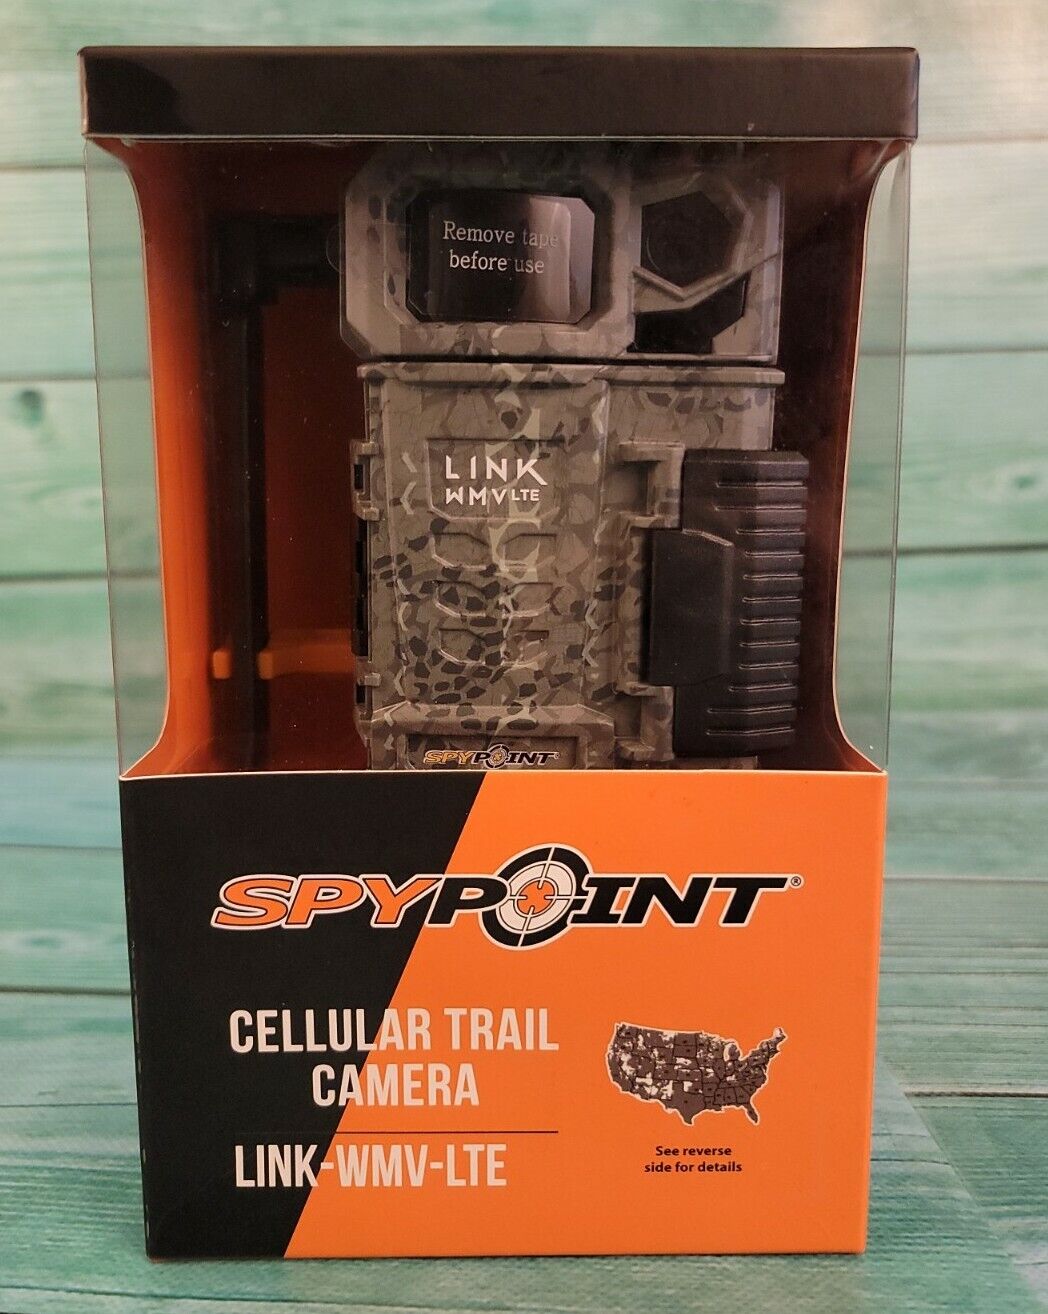 🔥NEW SPYPOINT LINK-WMV-LTE Cellular Trail Camera 8 MP W/ 48 MP Software🔥